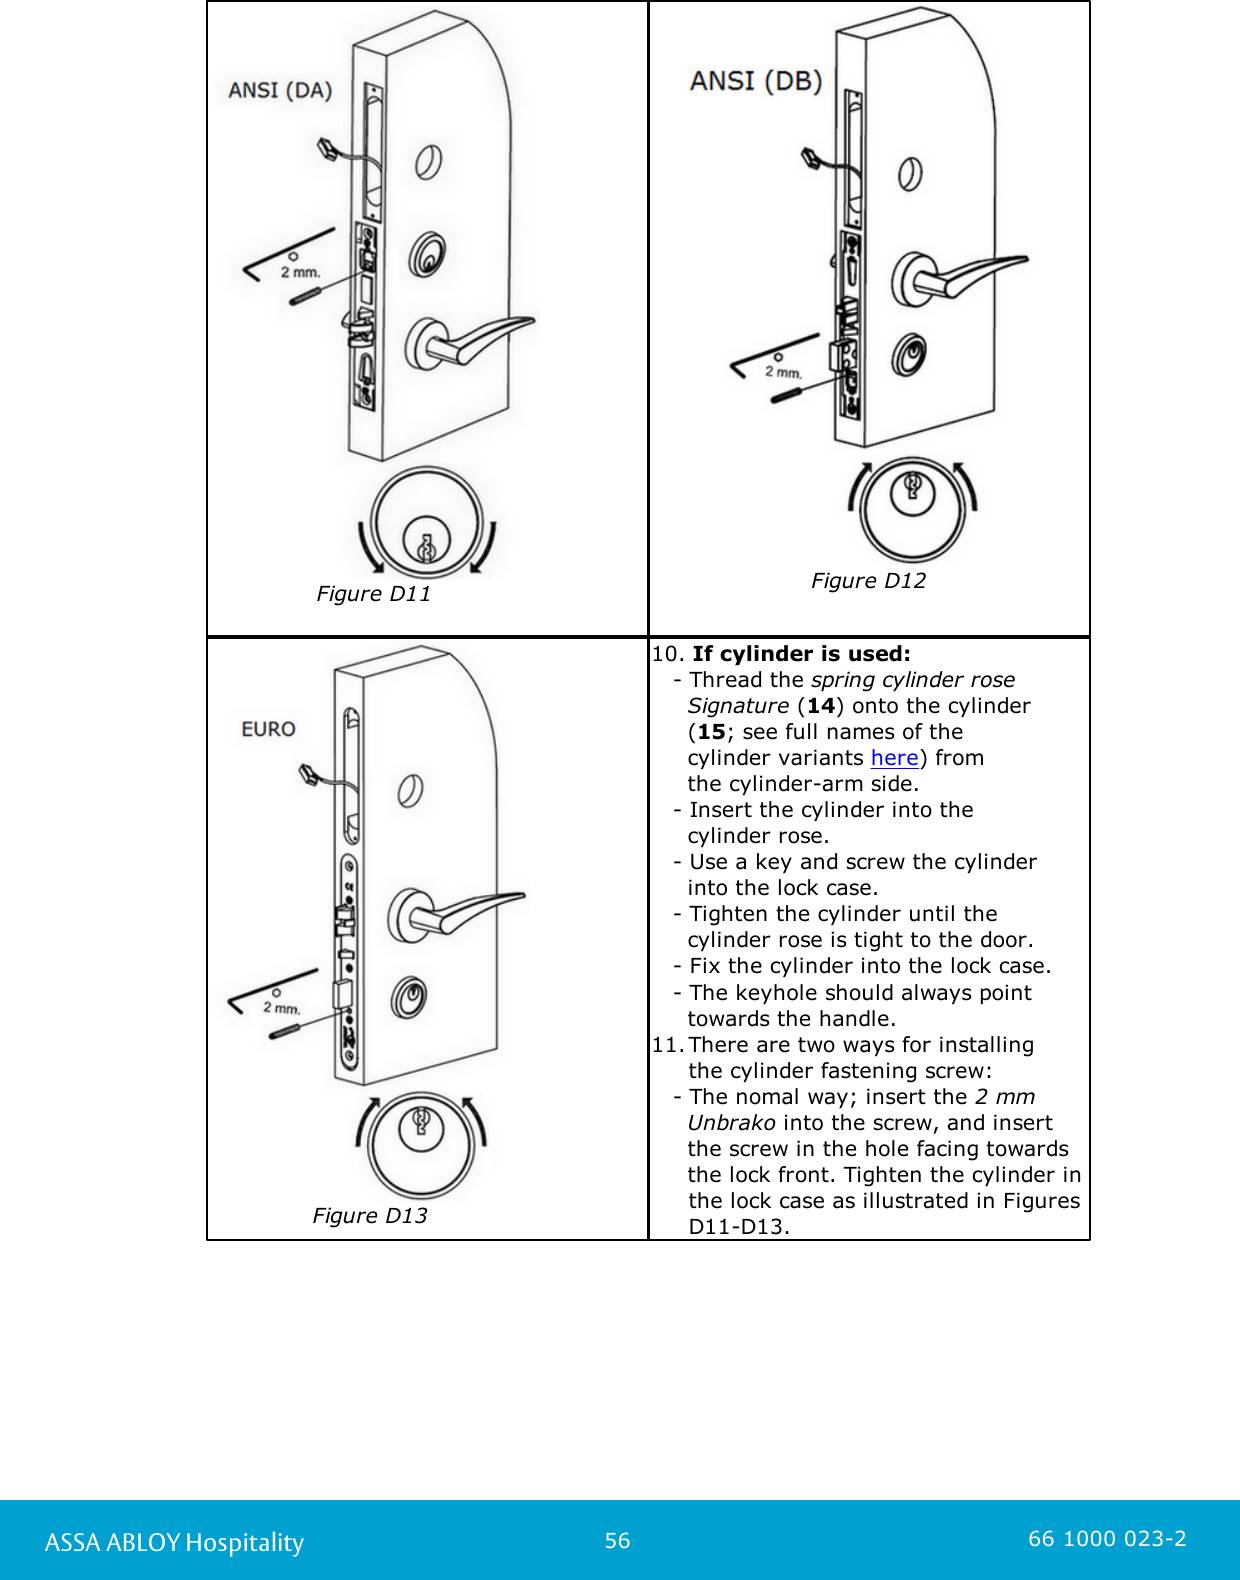 56ASSA ABLOY Hospitality 66 1000 023-2Figure D11Figure D12Figure D1310. If cylinder is used:   - Thread the spring cylinder roseSignature (14) onto the cylinder(15; see full names of thecylinder variants here) from the cylinder-arm side.    - Insert the cylinder into the cylinder rose.    - Use a key and screw the cylinder    into the lock case.    - Tighten the cylinder until the     cylinder rose is tight to the door.   - Fix the cylinder into the lock case.    - The keyhole should always point     towards the handle. 11.There are two ways for installing the cylinder fastening screw:    - The nomal way; insert the 2 mm       Unbrako into the screw, and insert     the screw in the hole facing towards     the lock front. Tighten the cylinder inthe lock case as illustrated in FiguresD11-D13. 